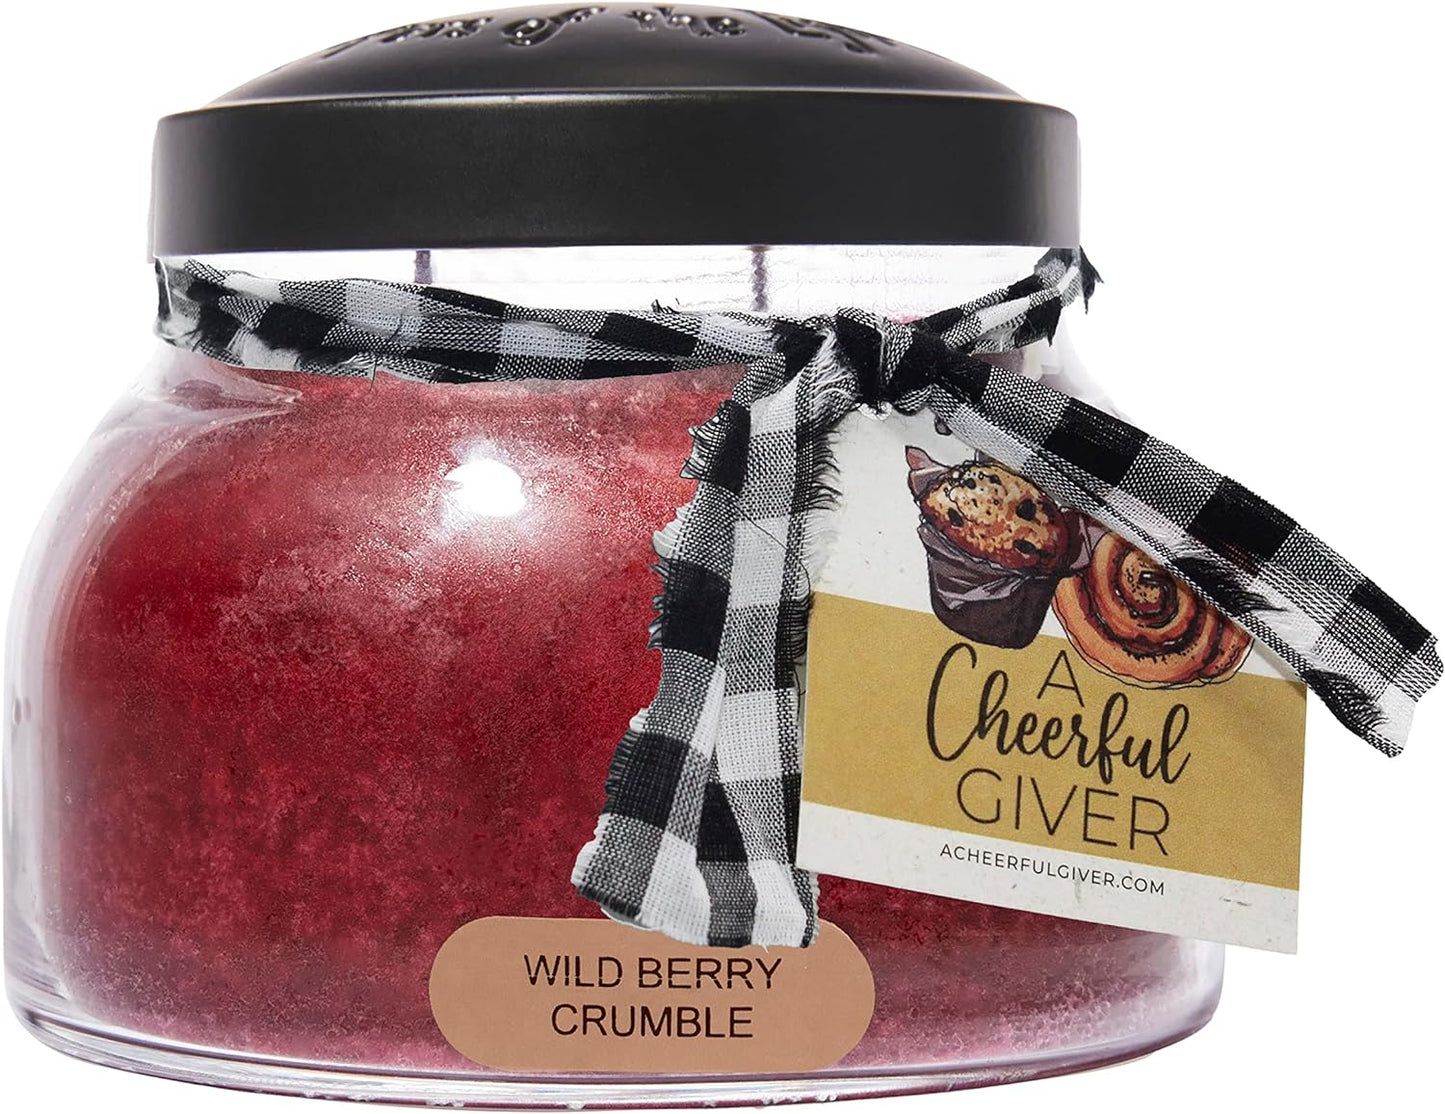 A Cheerful Giver - Cranberry Orange - 34oz Papa Scented Candle Jar with Lid - Keepers of the Light - 155 Hours of Burn Time, Gift for Women, Red